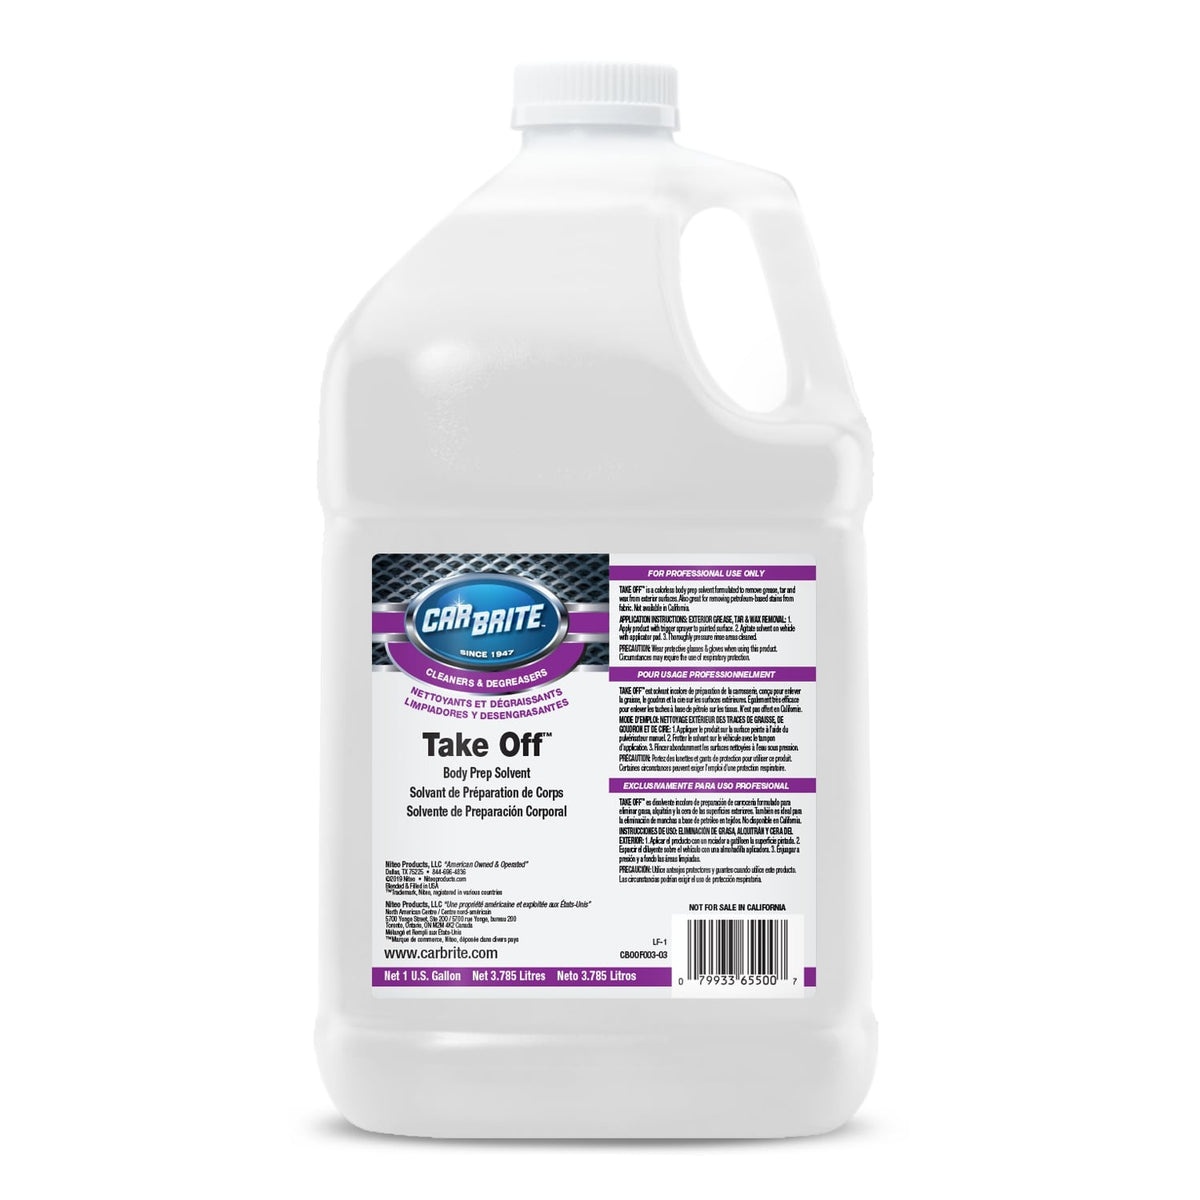 Wax and Tar Remover – Car Cleen Systems